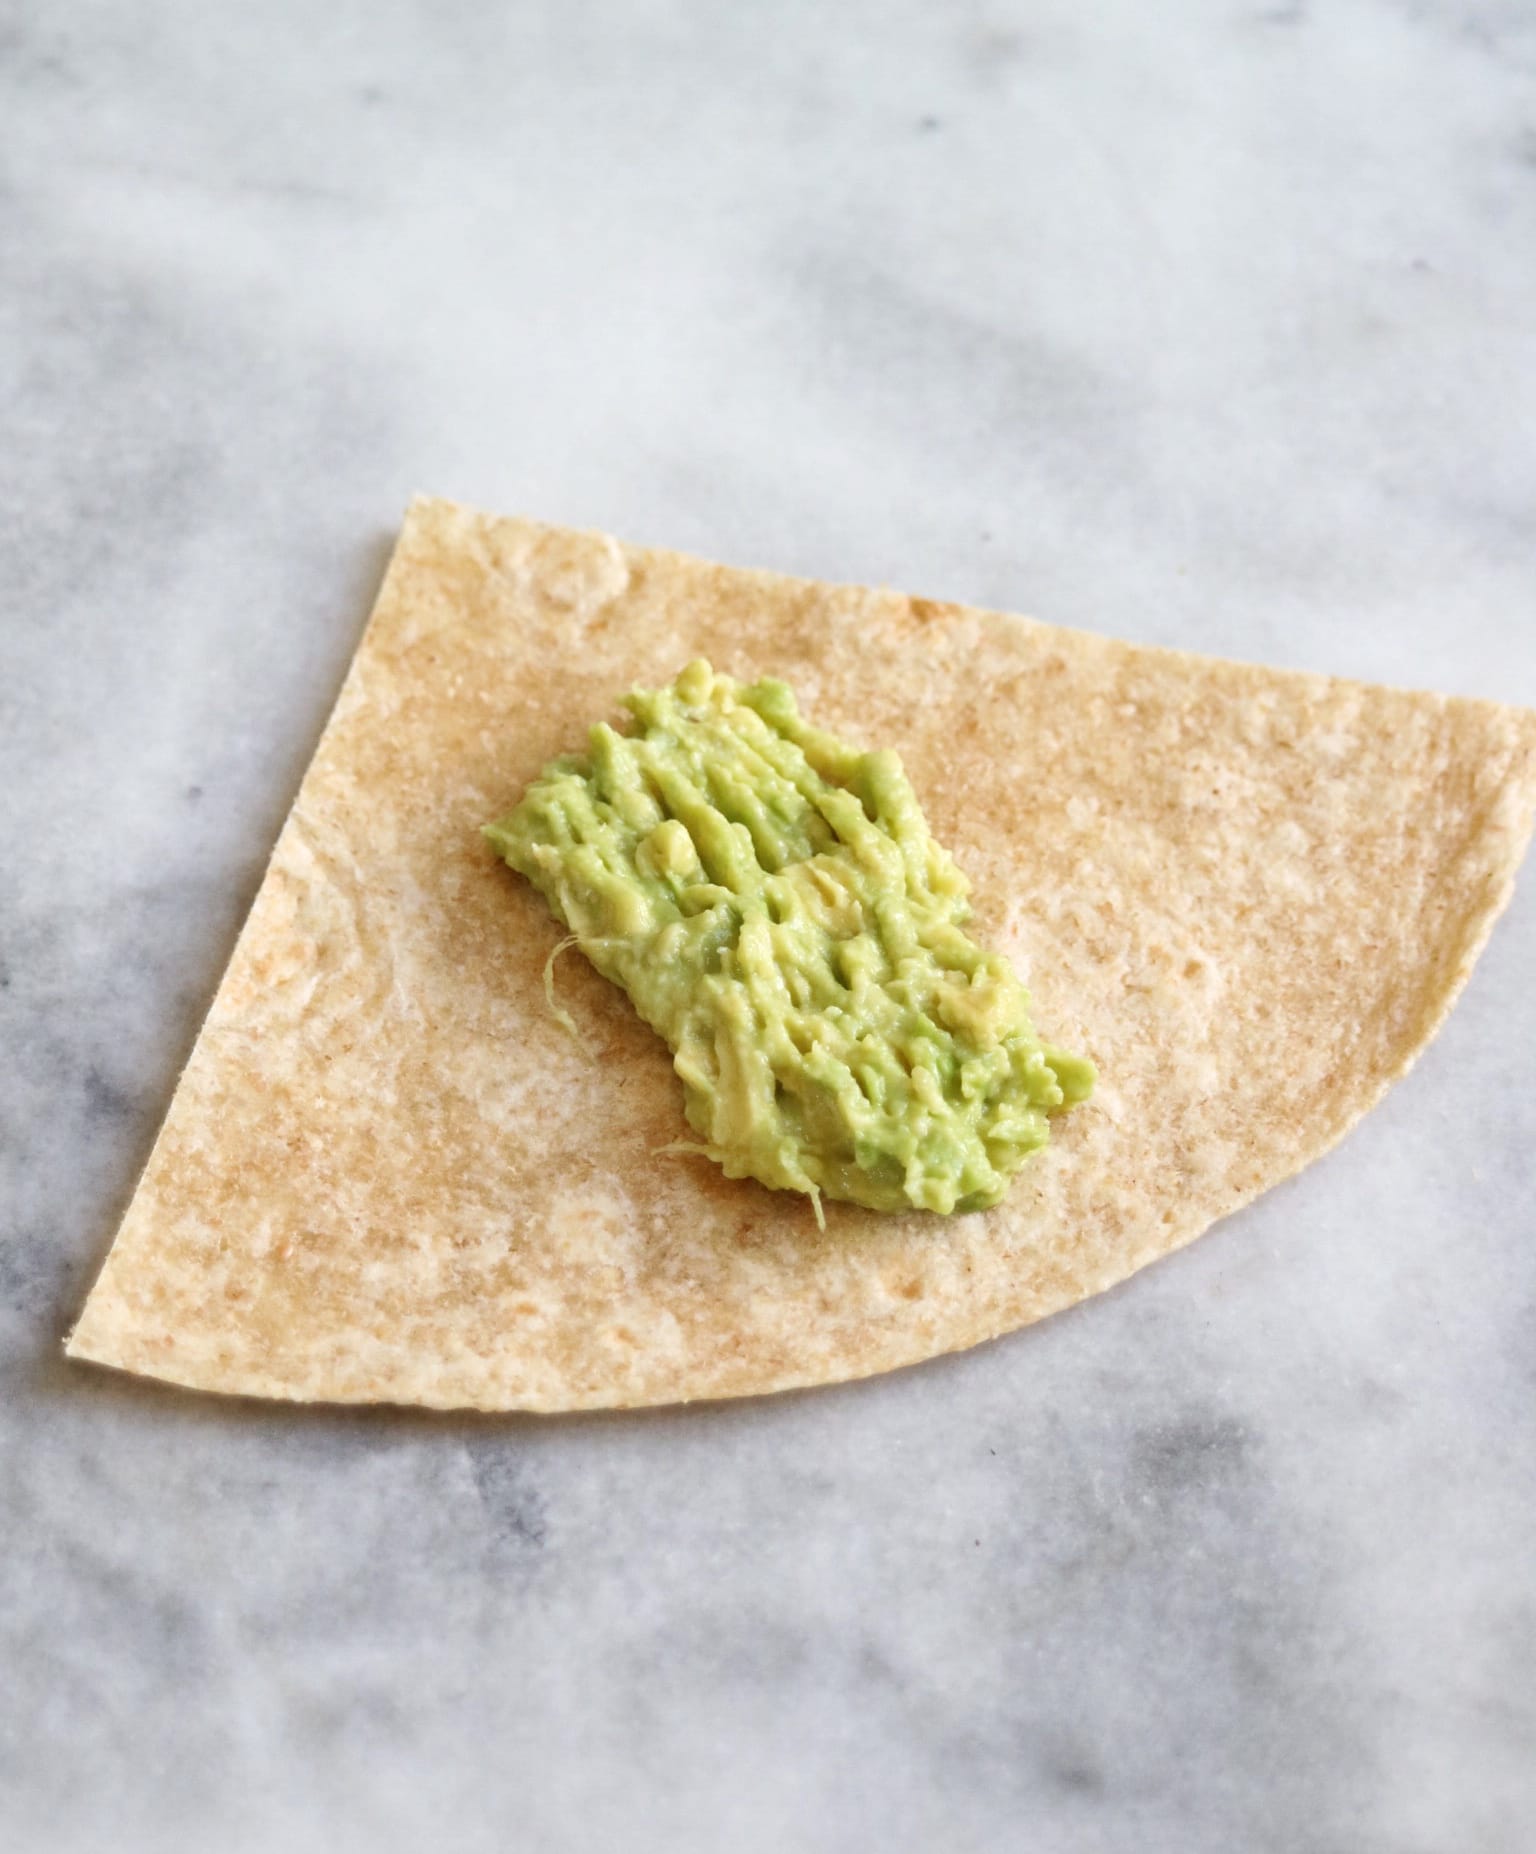 tortilla quarter with mashed avocado on top | The Nutrition Adventure